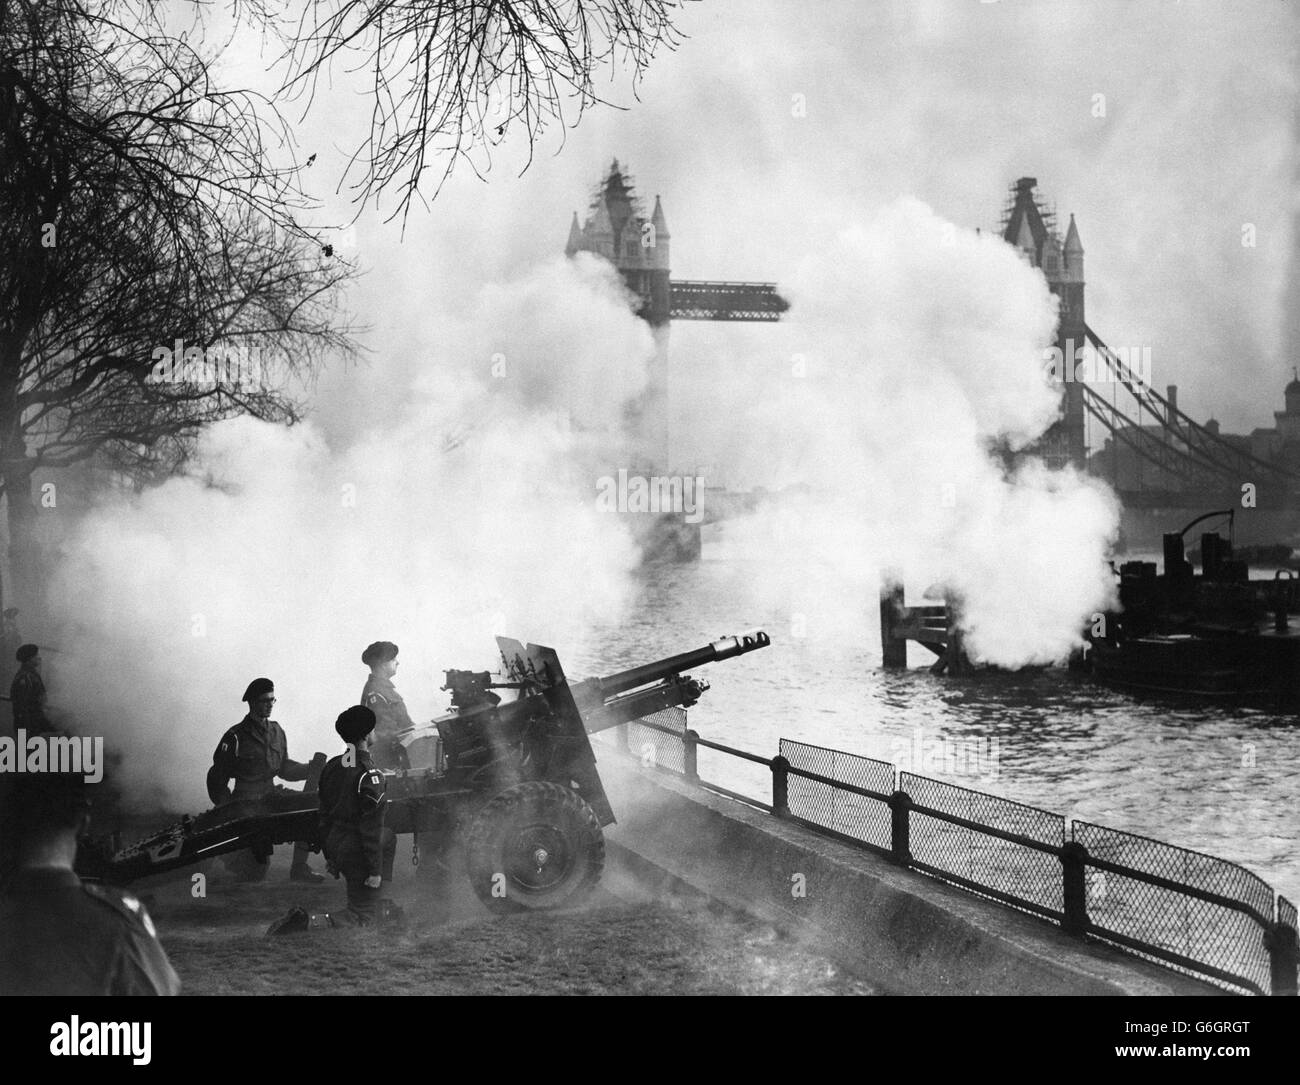 Marking the anniversary of King George VI's accession to the throne fourteen years ago, the 'A' Battery, 1st Regiment, Hon. Artillery Company fired a 62 gun salute at the Tower of London. Tower Bridge can be seen in the background through the smoke. Stock Photo